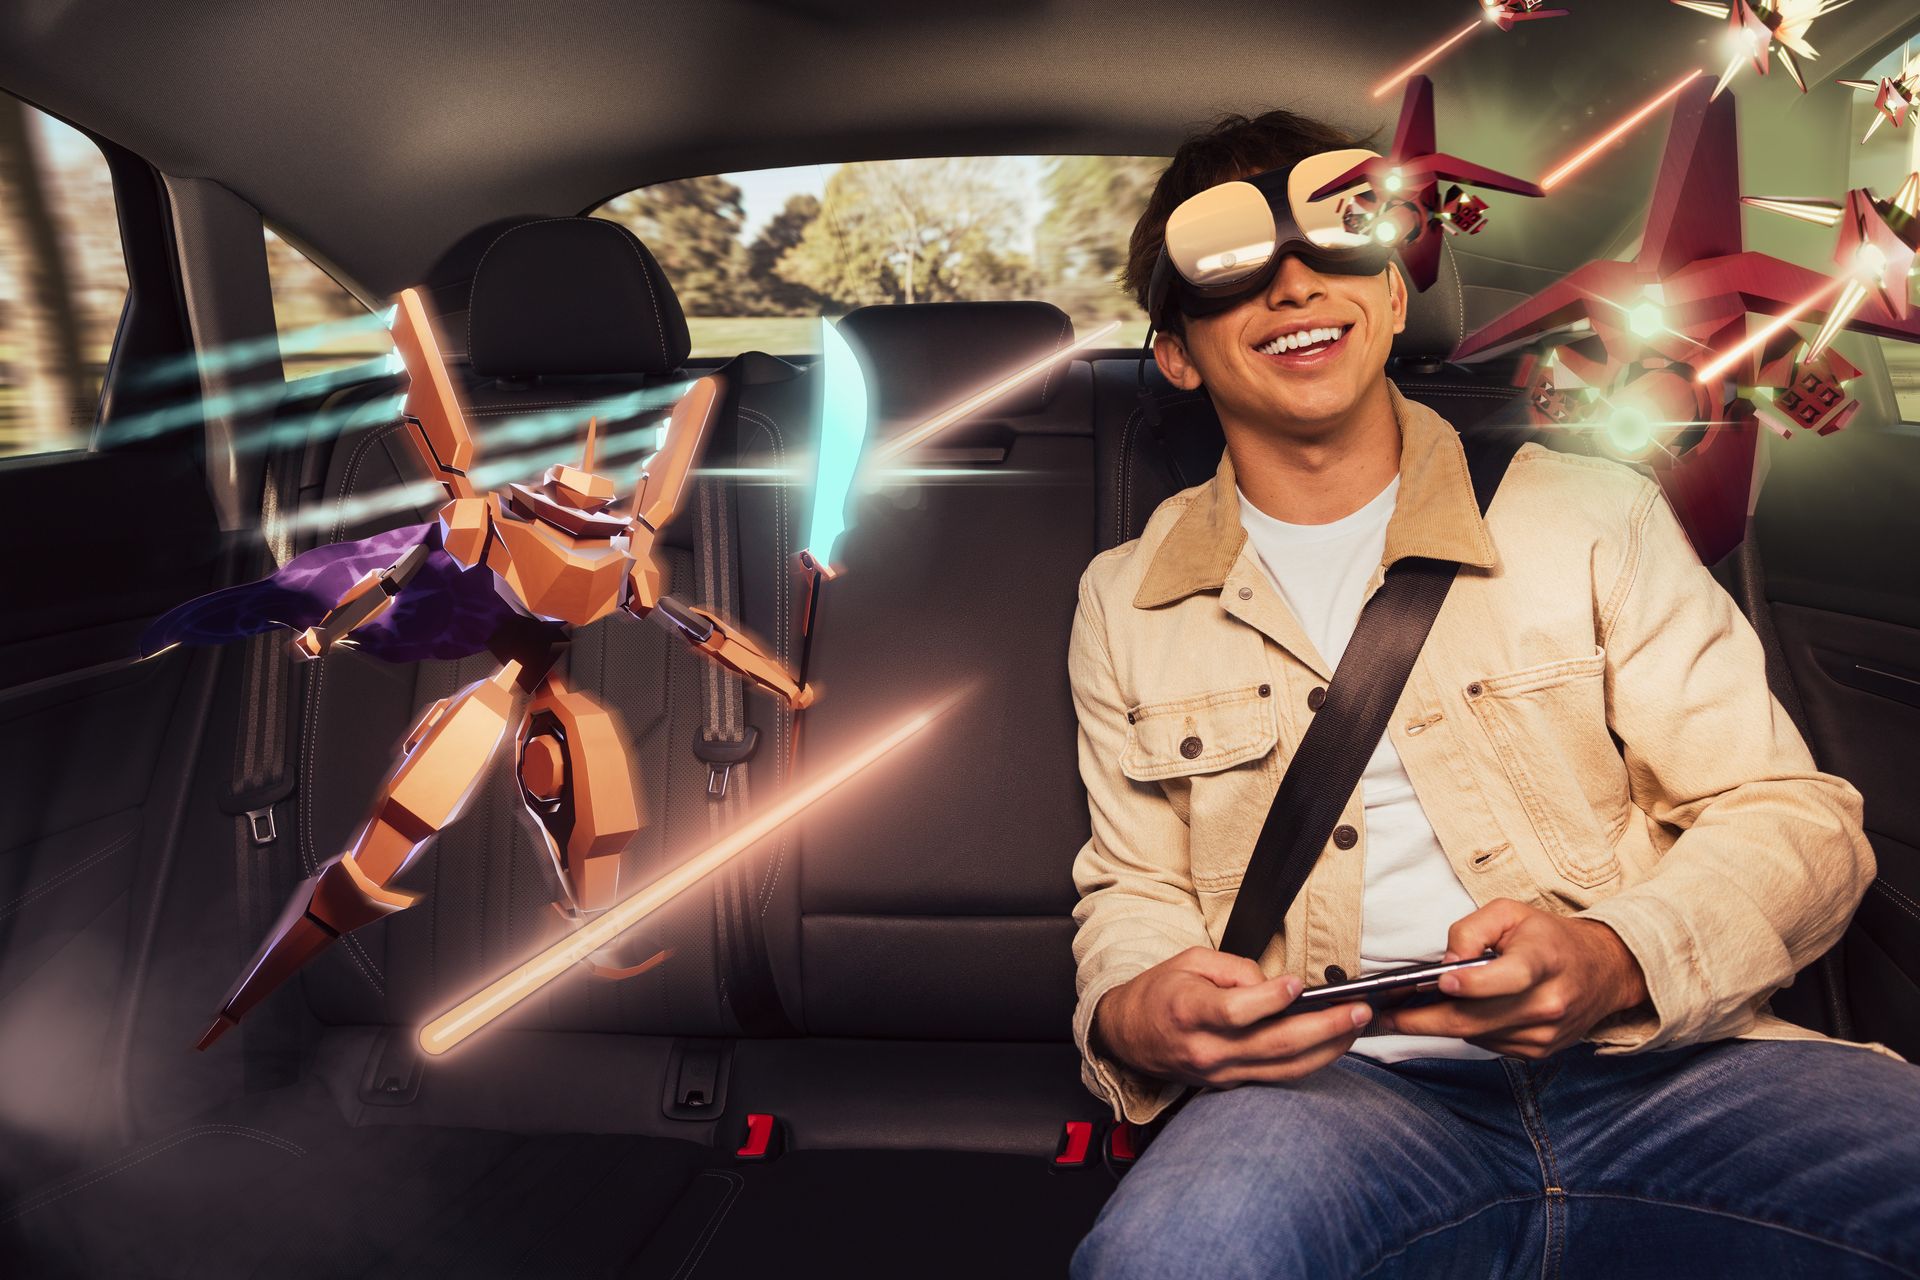 Boy playing Cloudbreaker in the back of the car with VIVE Flow headset